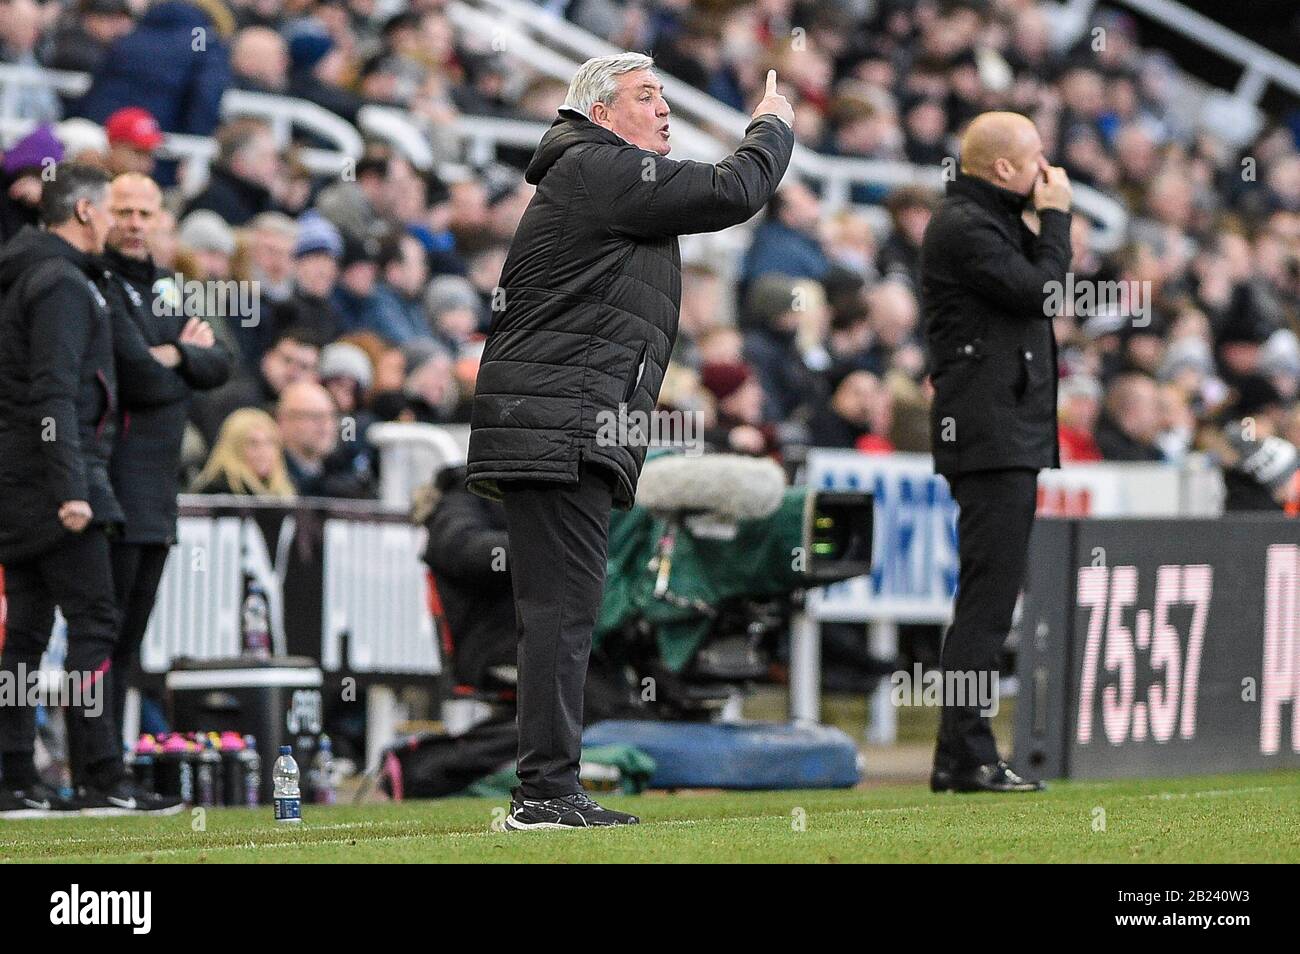 NEWCASTLE UPON TYNE, ENGLAND - FEBRUARY 29TH Newcaste United Manager, Steve Bruce, during the Premier League match between Newcastle United and Burnley at St. James's Park, Newcastle on Saturday 29th February 2020. (Credit: Iam Burn | MI News) Photograph may only be used for newspaper and/or magazine editorial purposes, license required for commercial use Credit: MI News & Sport /Alamy Live News Stock Photo